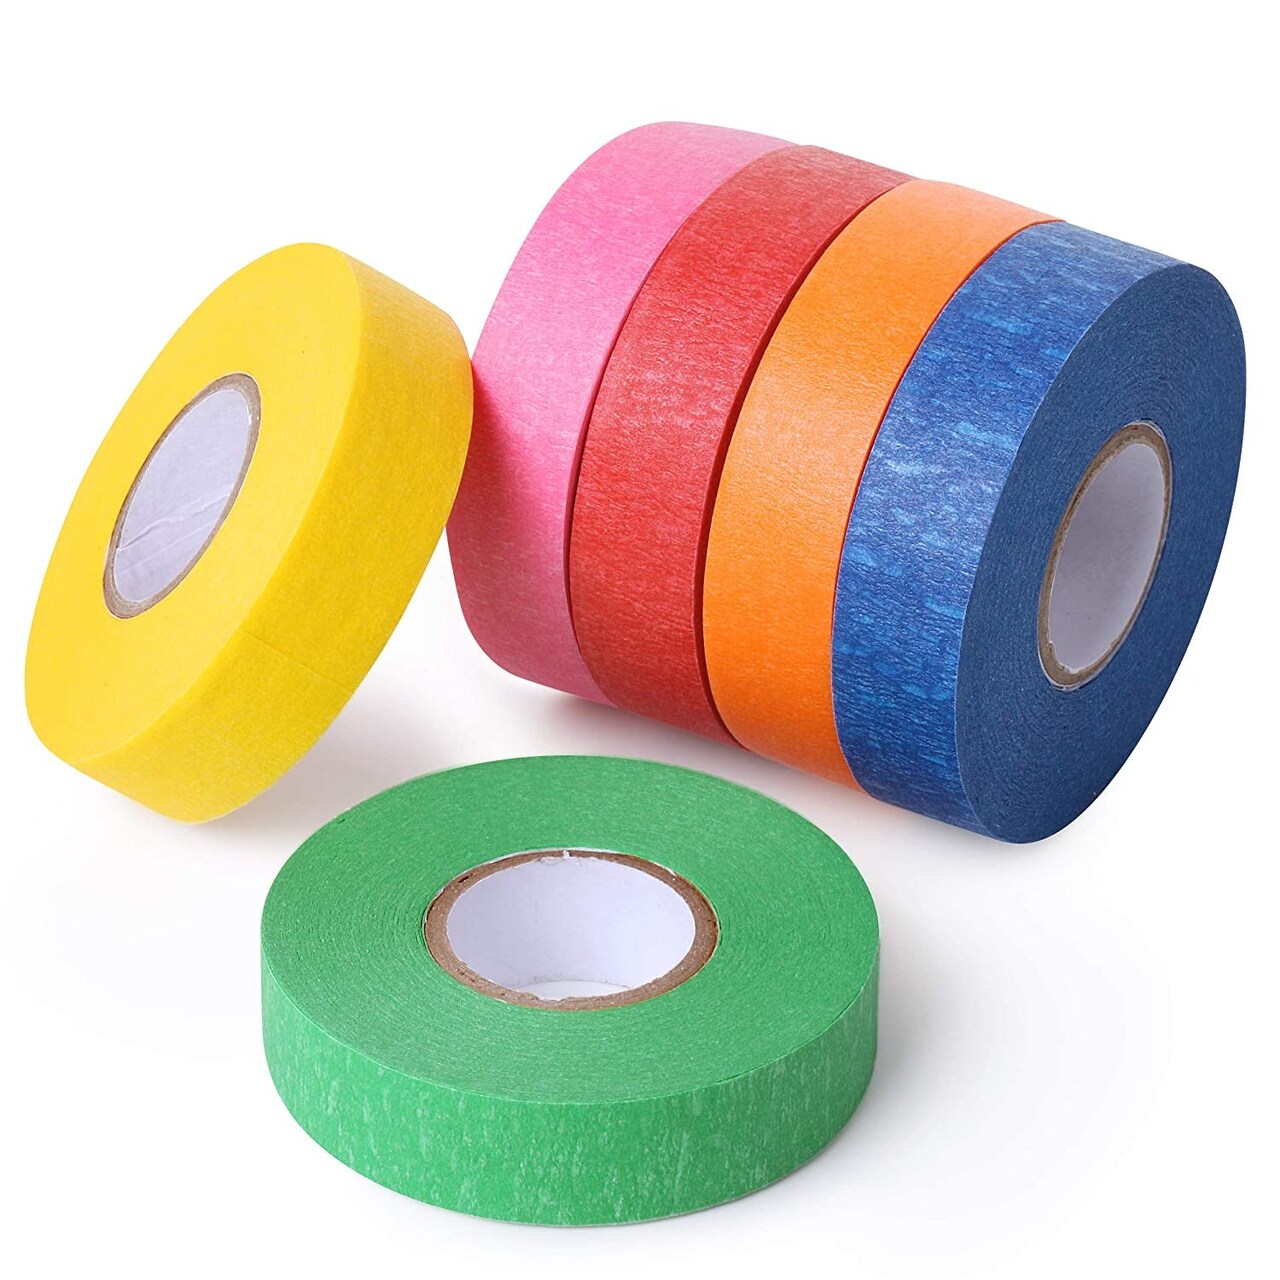 Colored Masking Tape, Colored Painters Tape for Arts and Crafts, 6